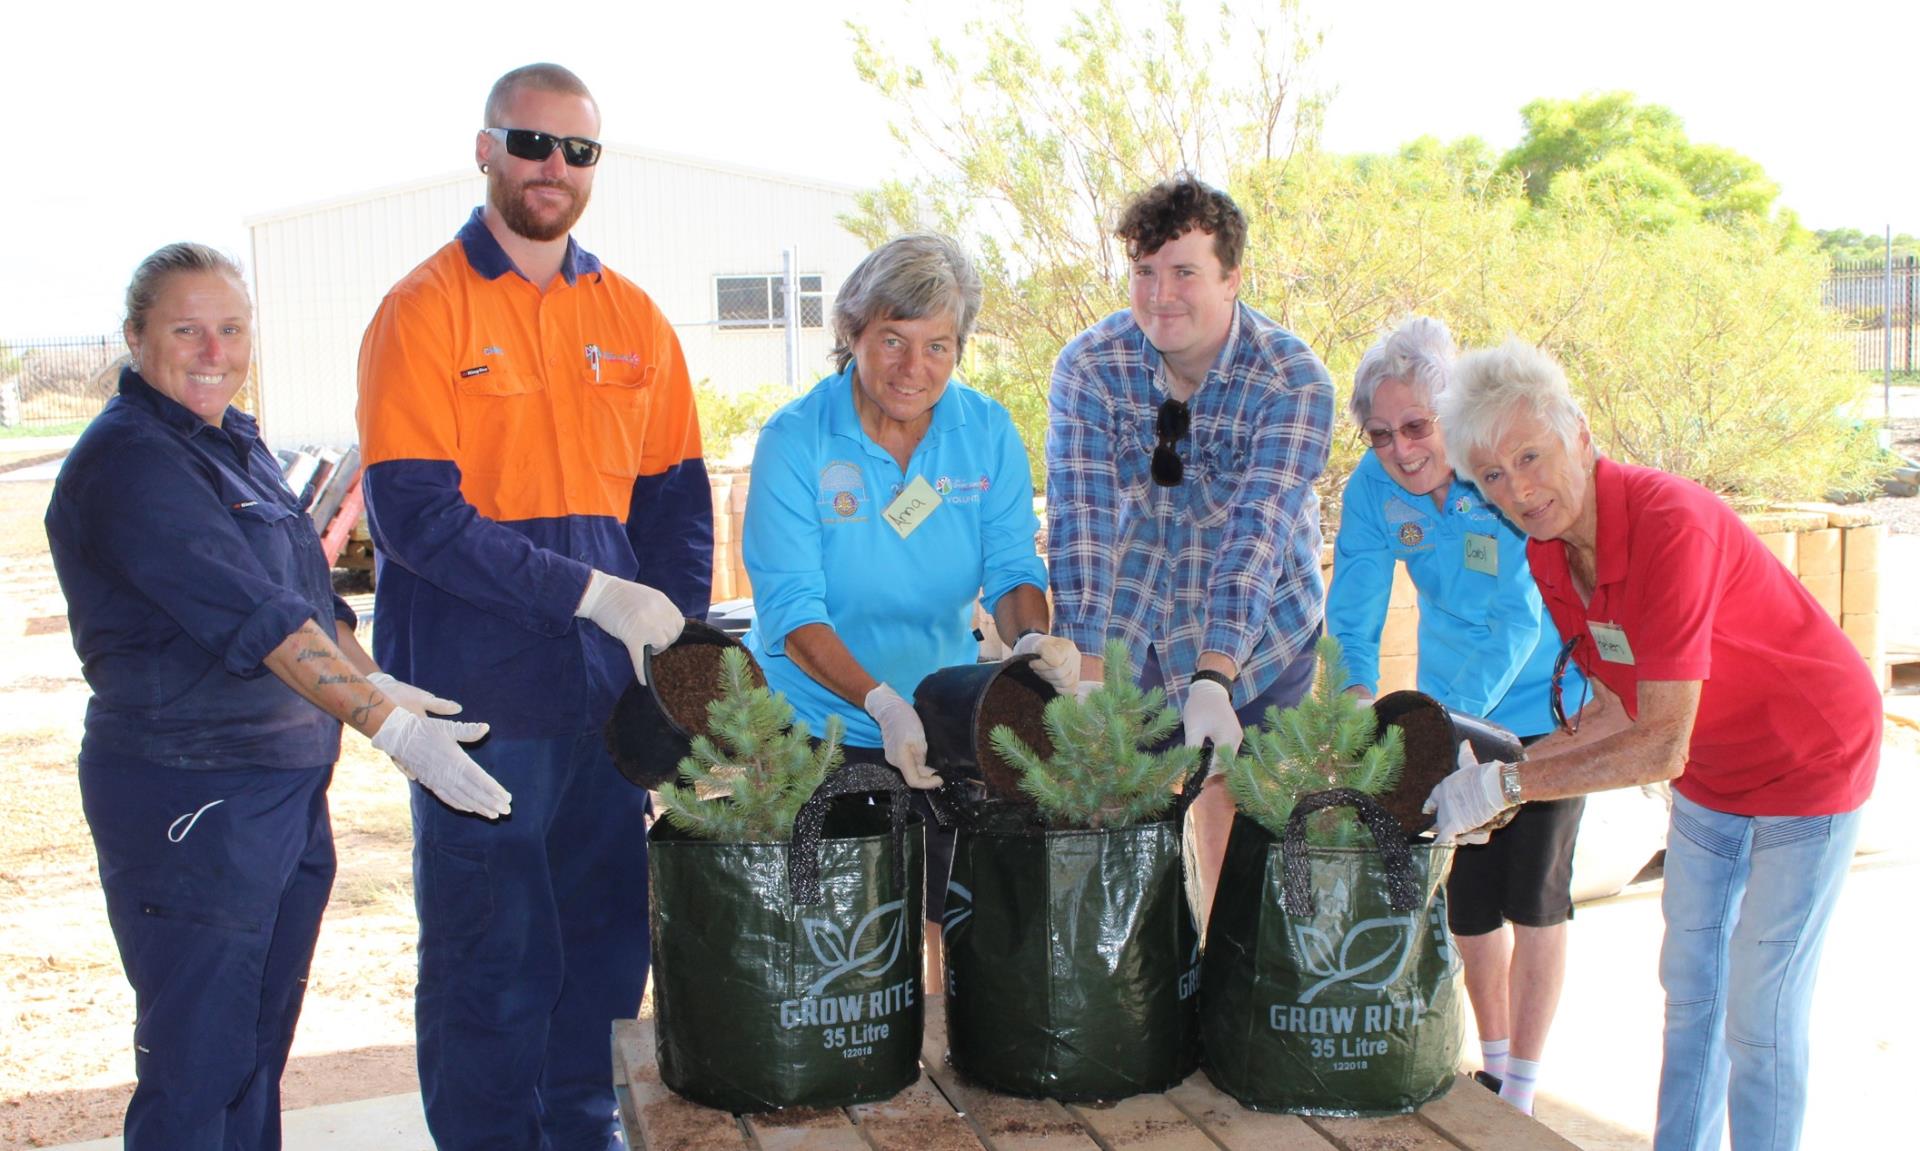 City of Greater Geraldton’s Community Nursery Officer Jeanette Reynolds (from left) and Leading Hand Horticulture Maintenance Chris McKay assist Community Nursery Volunteers Anna Byer, Tobyn Fitch, Carol Davis and Helen Sumpton to pot Lone Pine saplings into 35litre bags, so the plants have room to grow into small trees.